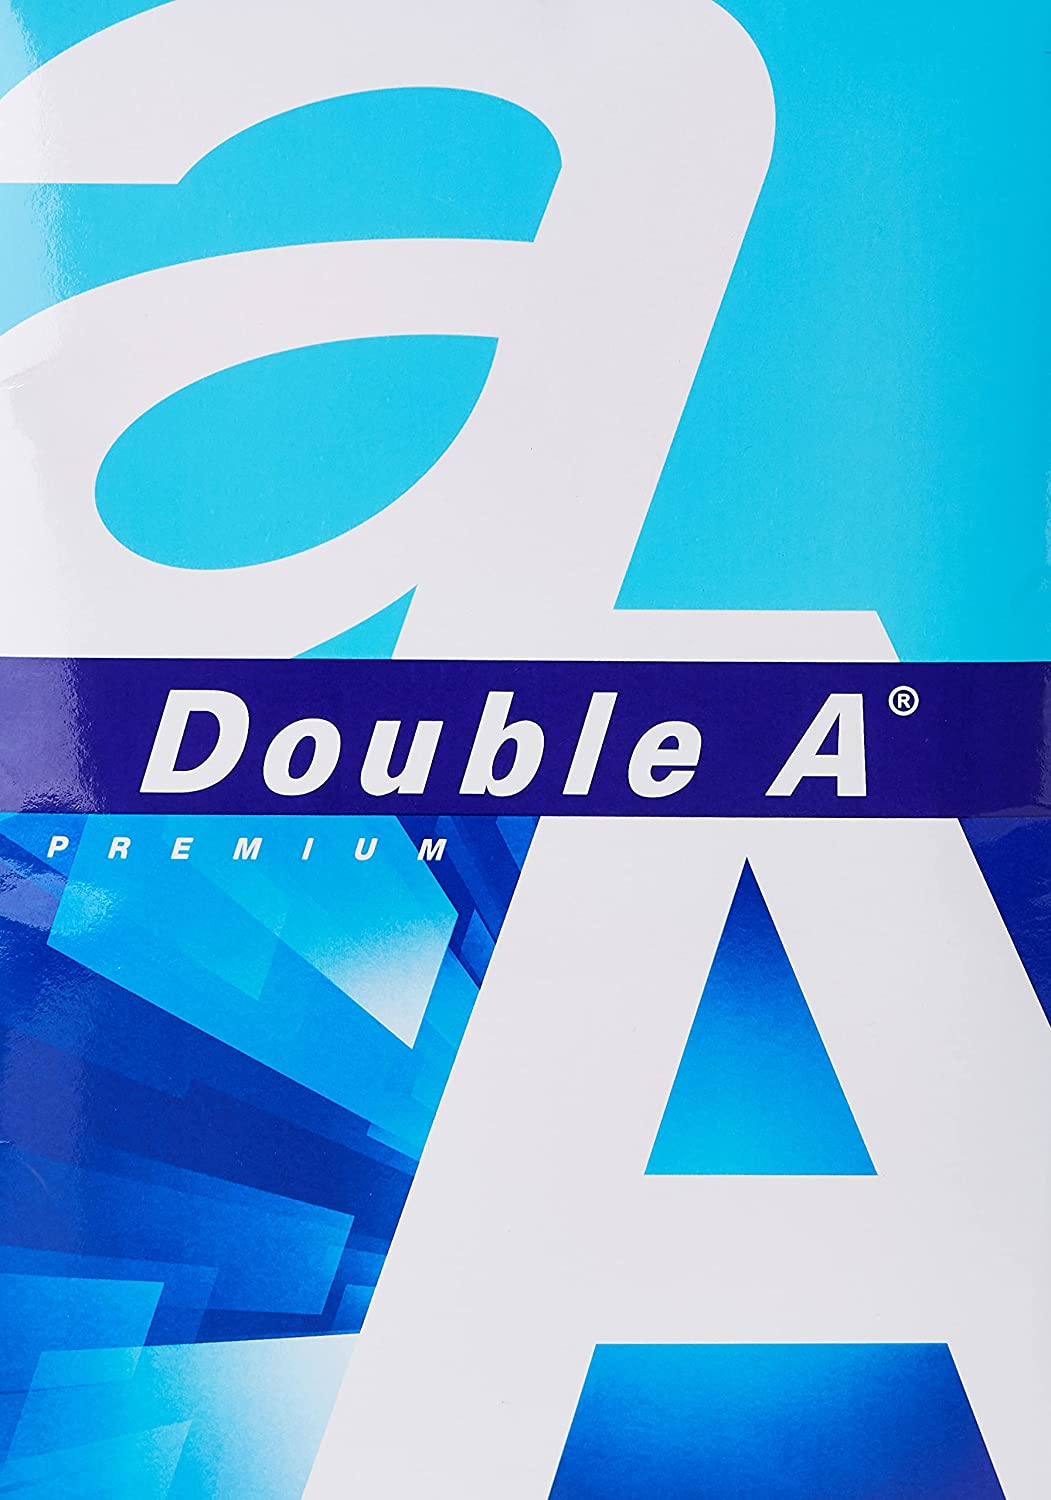 Double A Printing Paper A4 - 500 Sheets